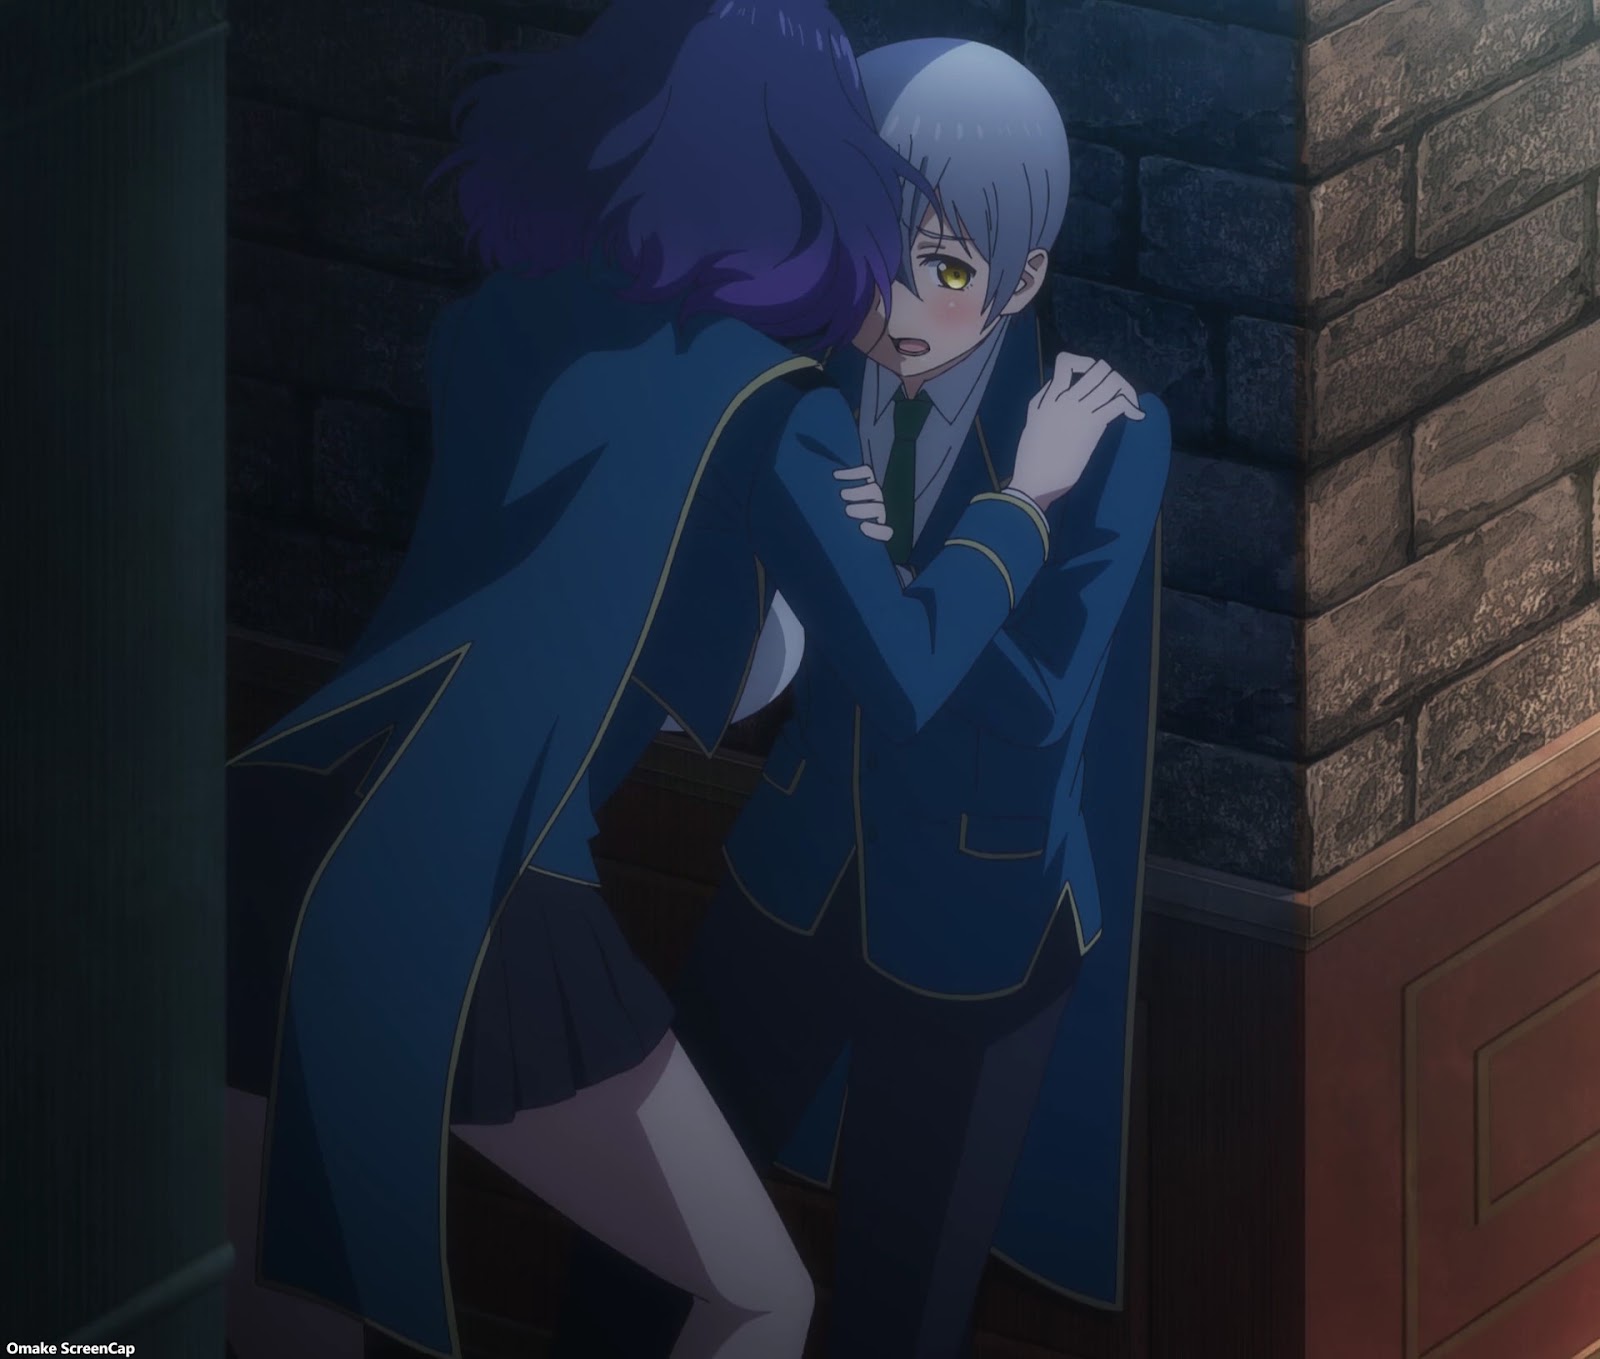 Vermeil in Gold Episode 2 Preview Images Released - Anime Corner